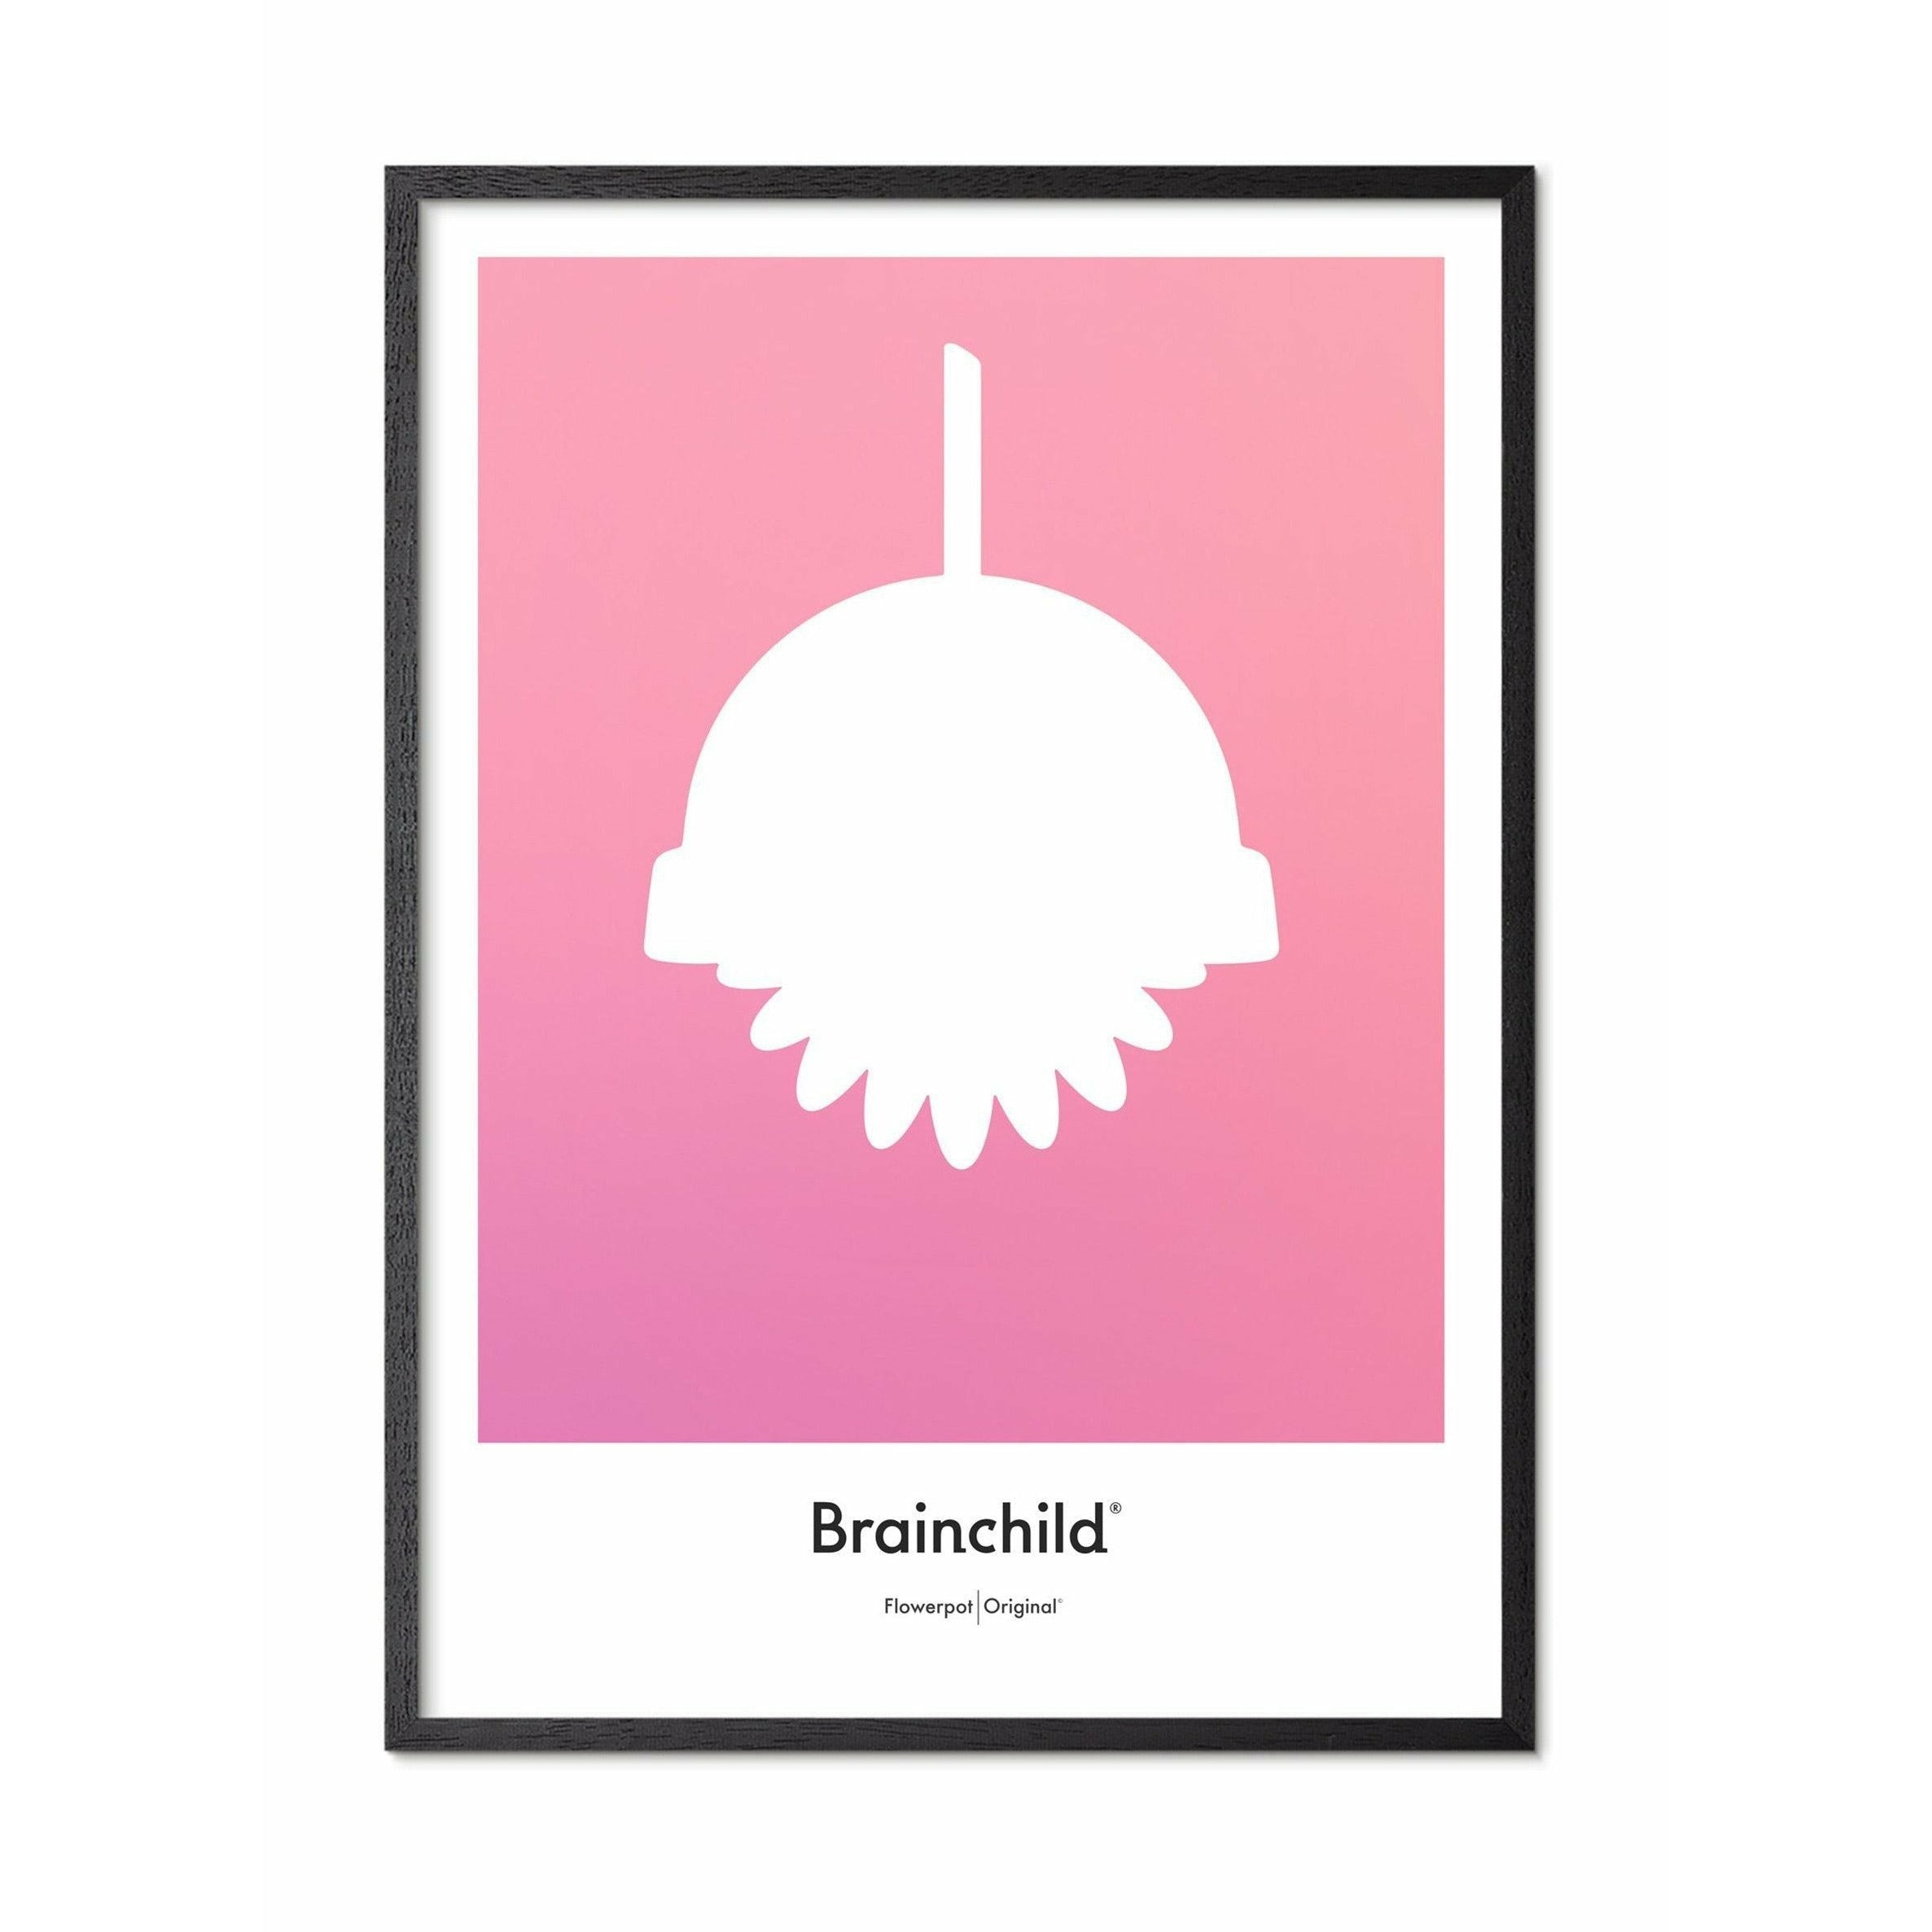 Brainchild Flowerpot Design Icon Poster, Black Lacquered Wood Frame A5, Pink